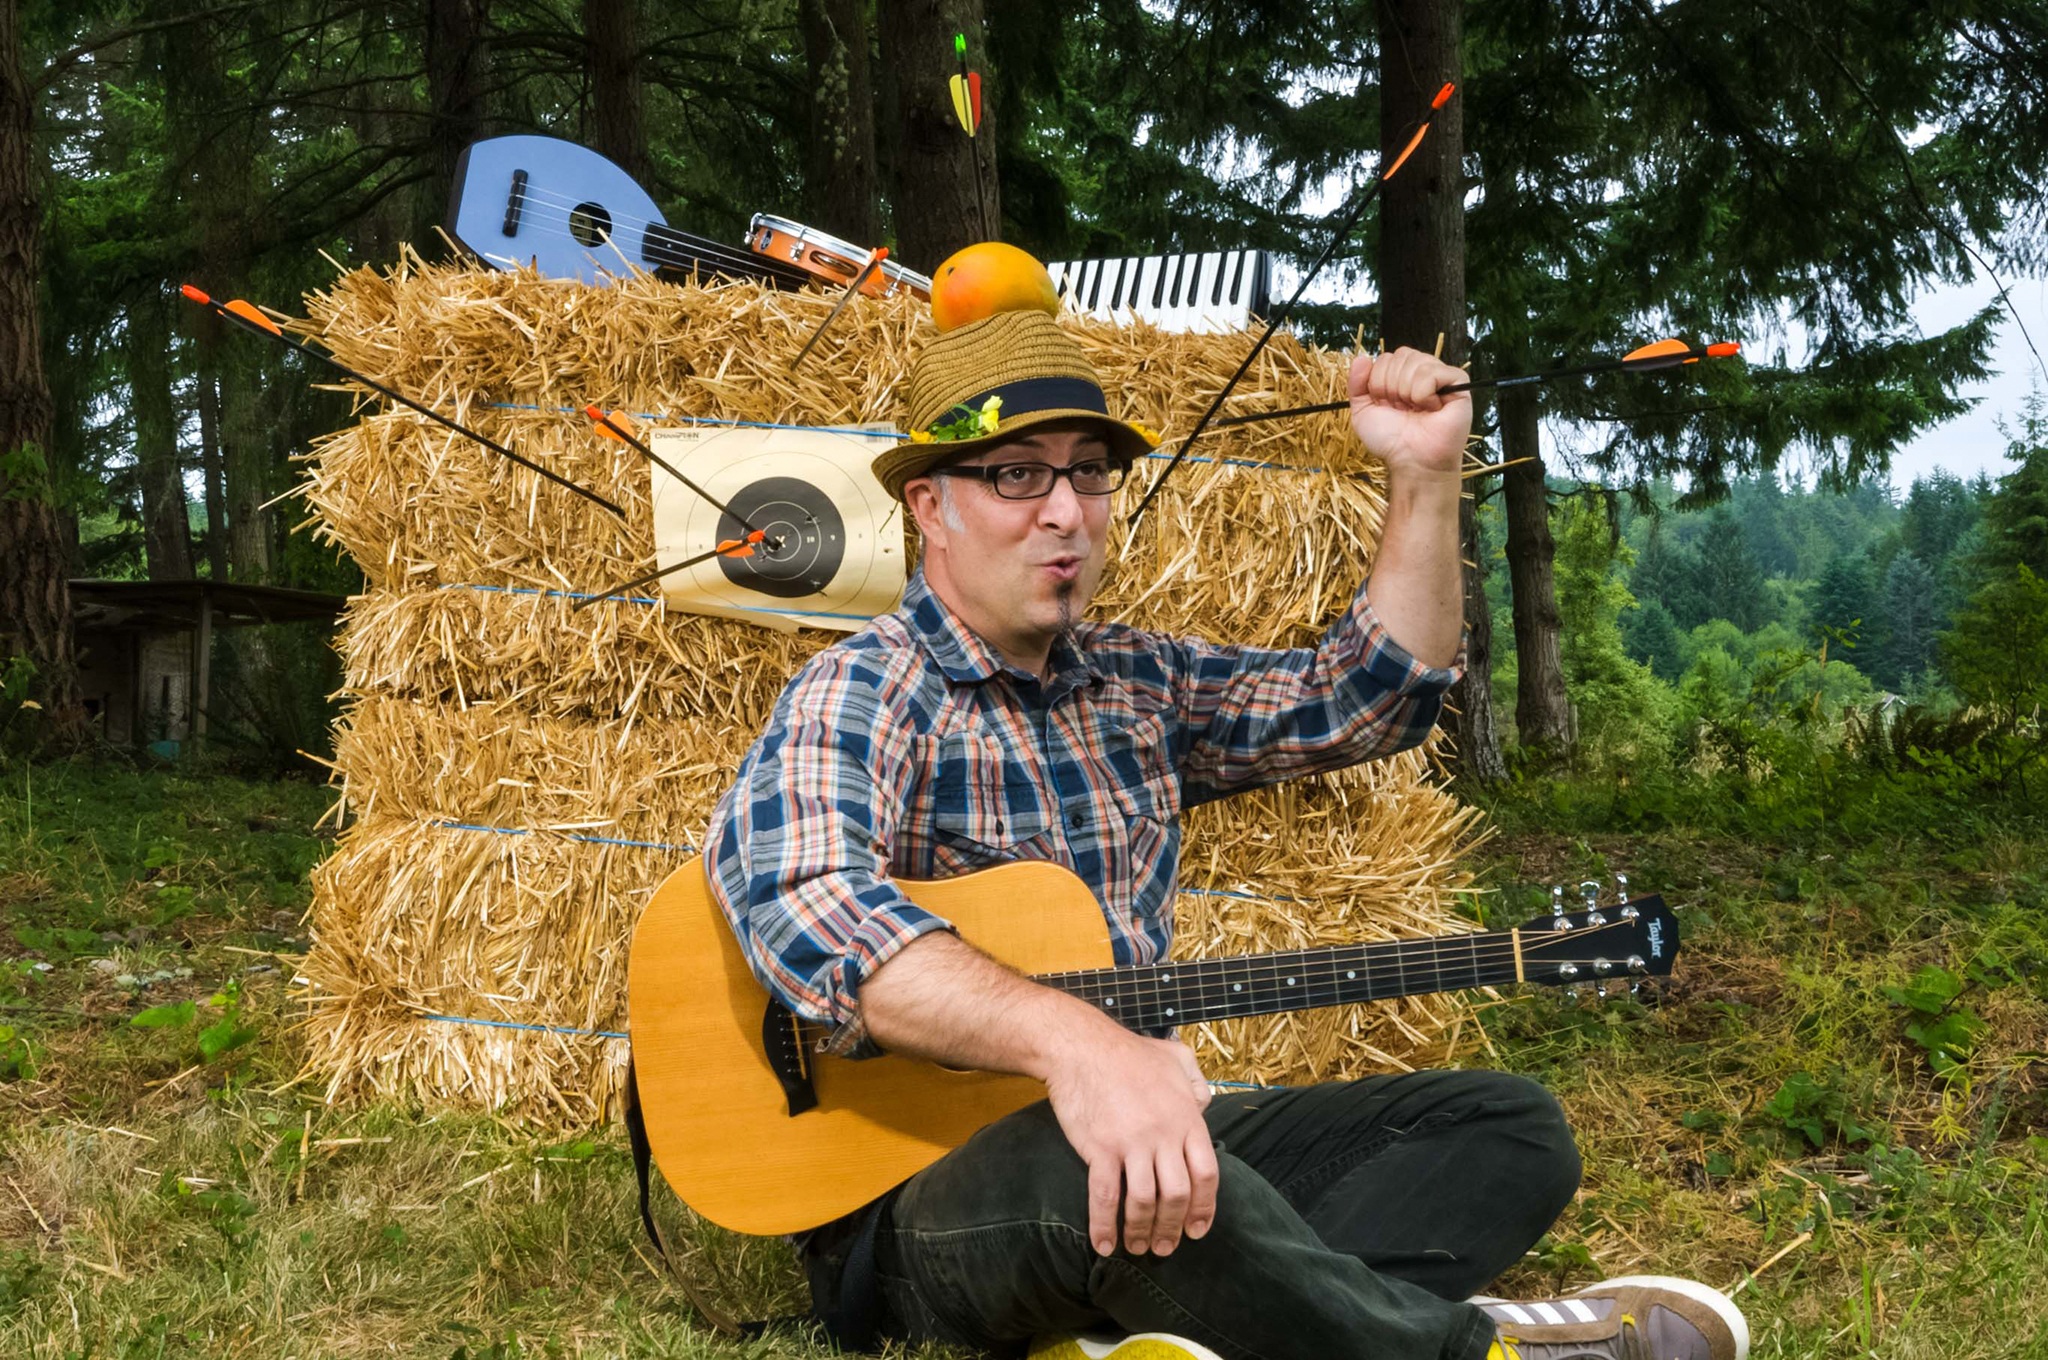 Johnny Bregar of Seattle will bring his “engaging, eclectic” music to Sequim and Port Angeles libraries Saturday.